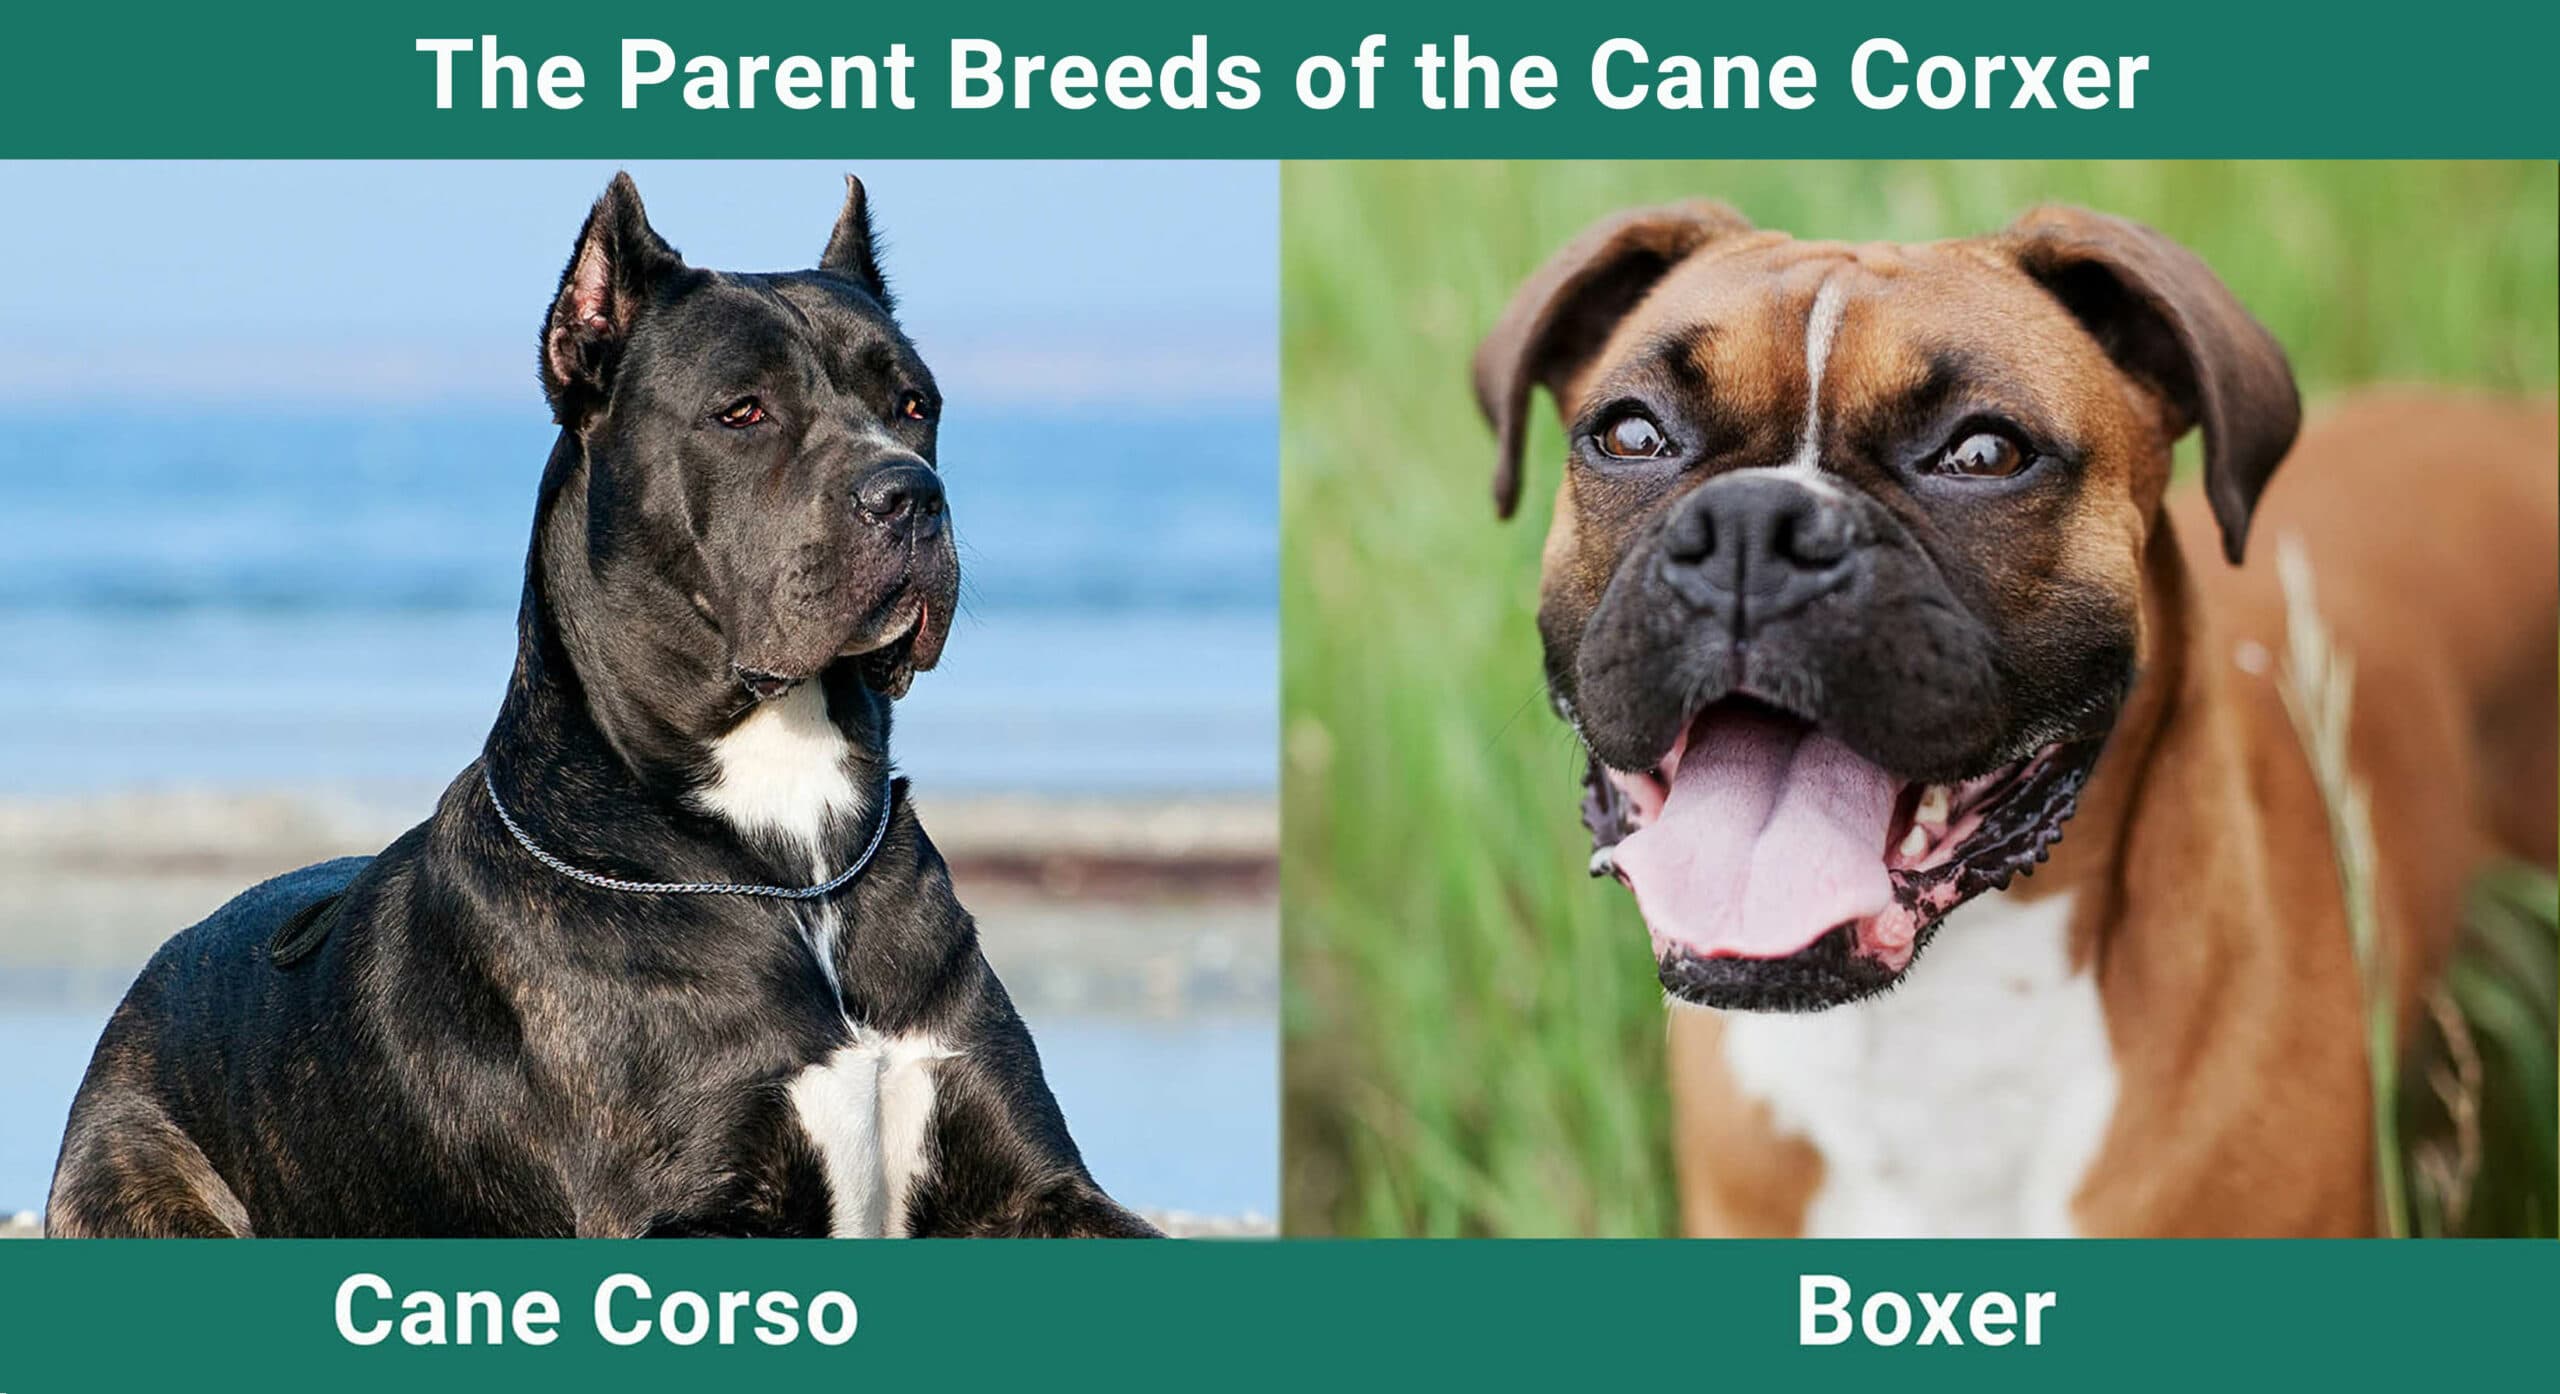 The-Parent-Breeds-of-the-Cane-Corxer-scaled-2